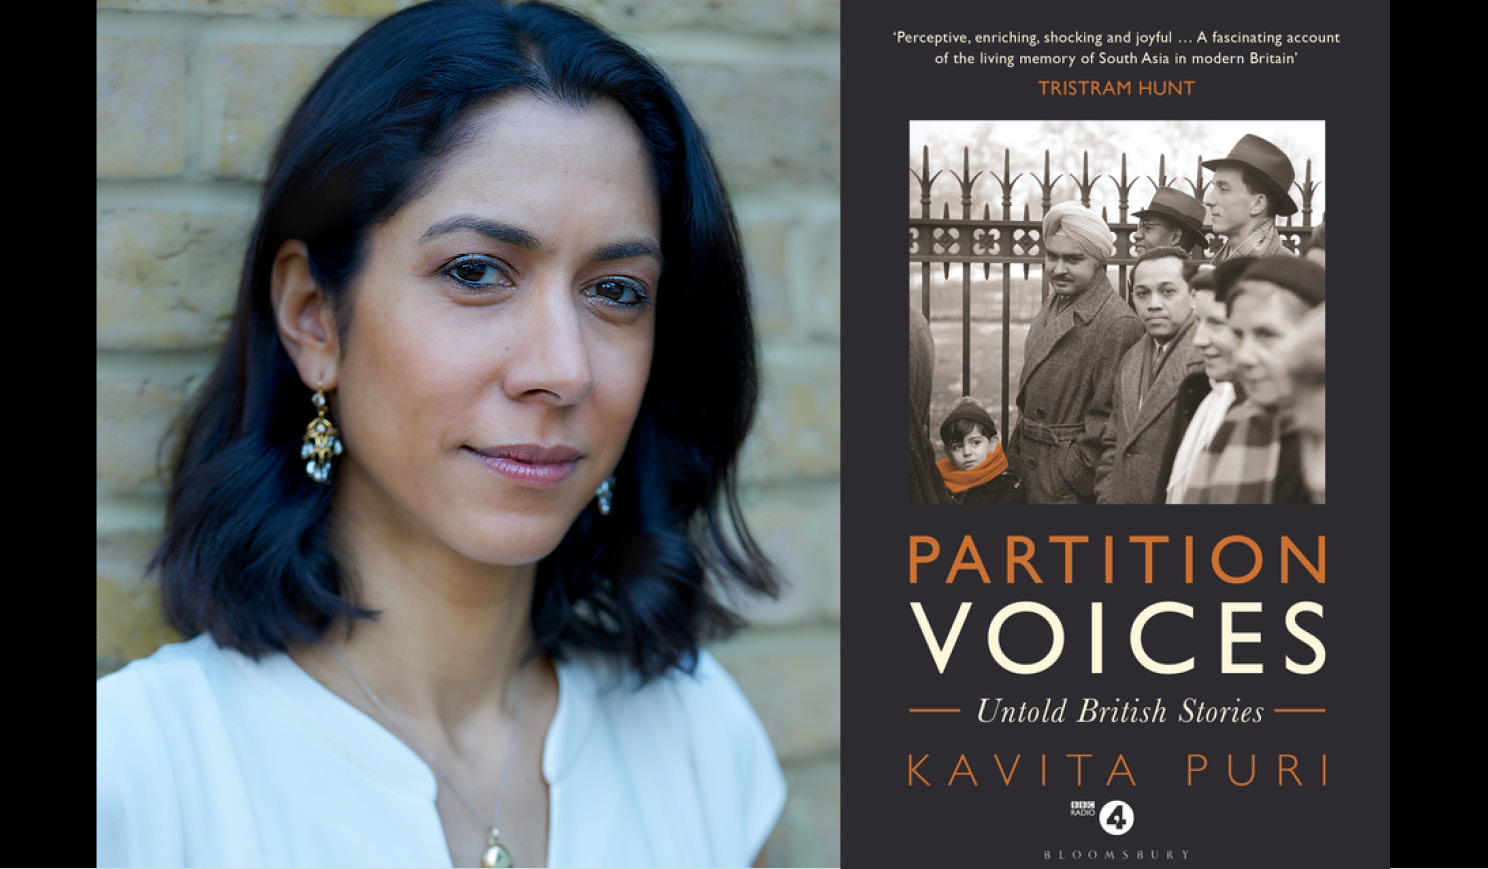 Kavita Puri's headshot alongside the cover of her book Partition Voices